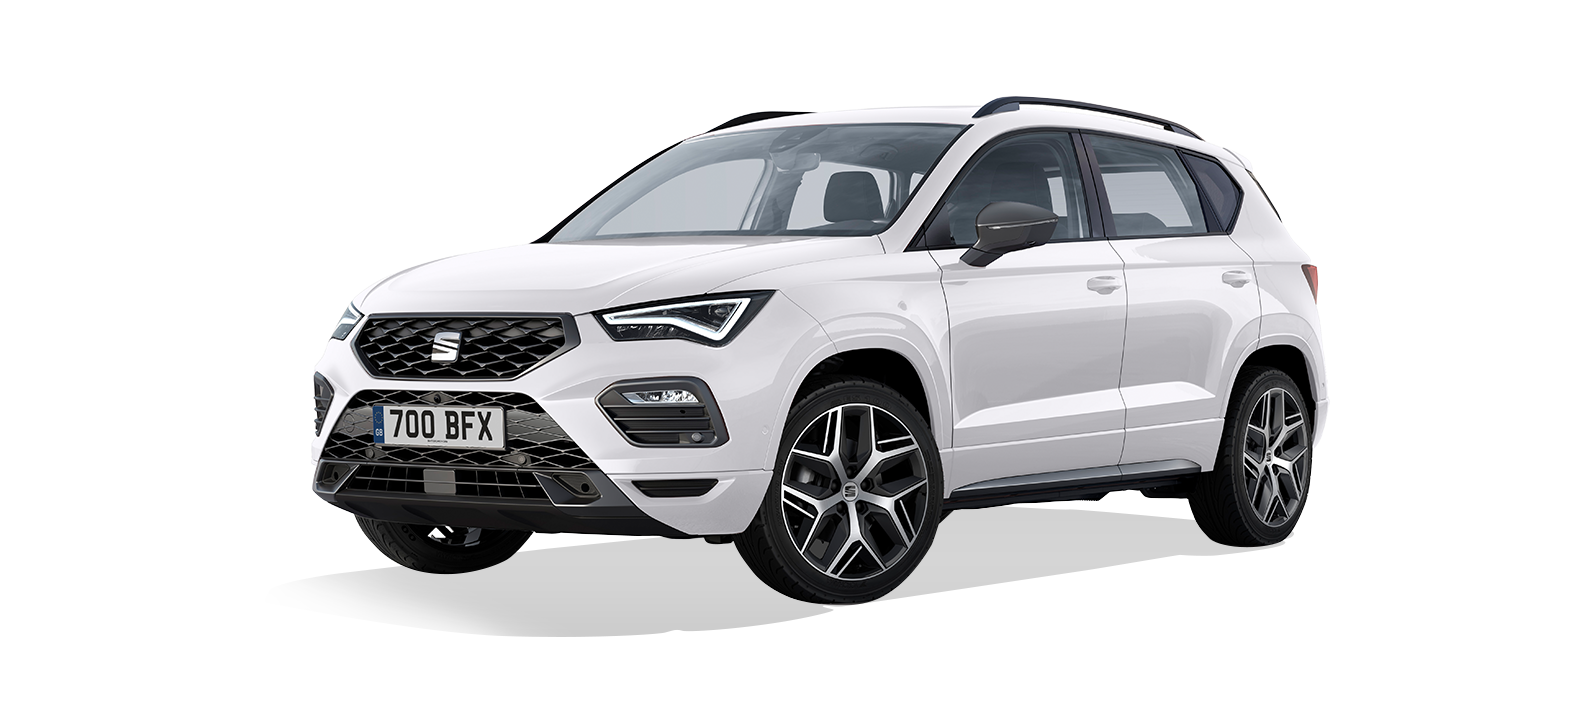 Technical information for the SEAT Ateca FR Sport